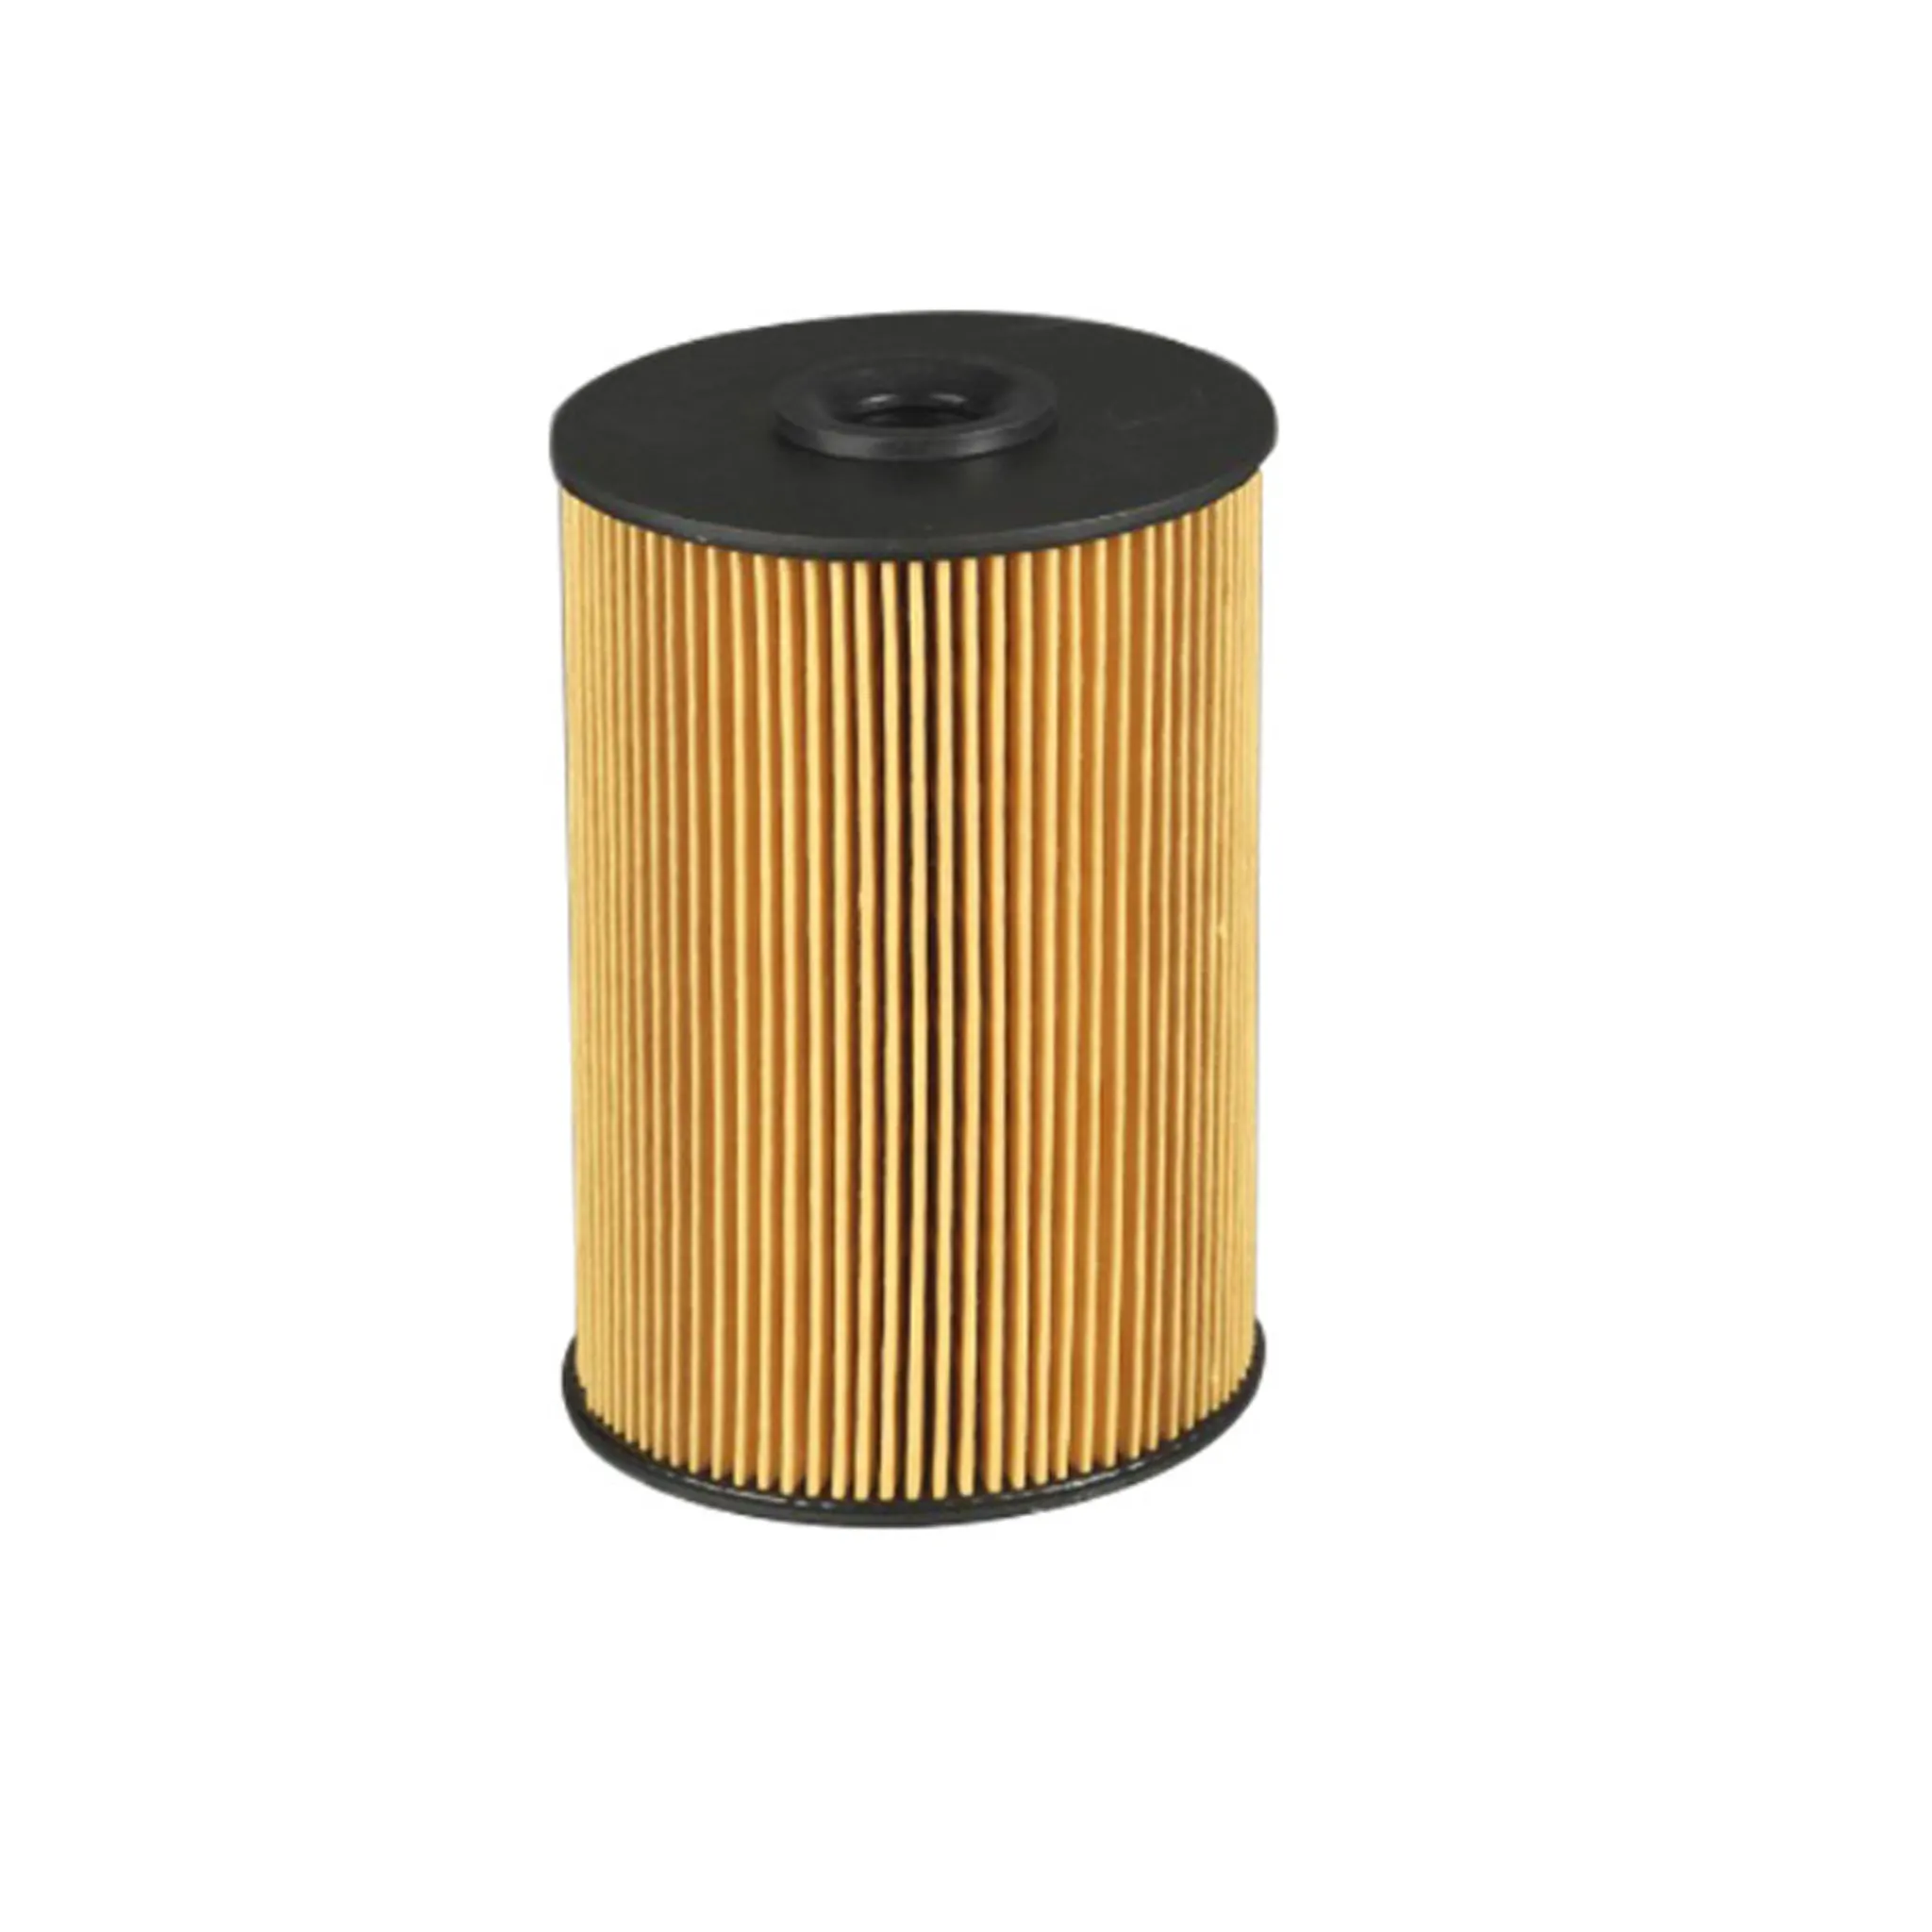 SY22 China Oil Filter Manufacturers Wholesale Auto Parts Engine Car Oil Filter For Geely Chery Haval Mg Changan Isuzu